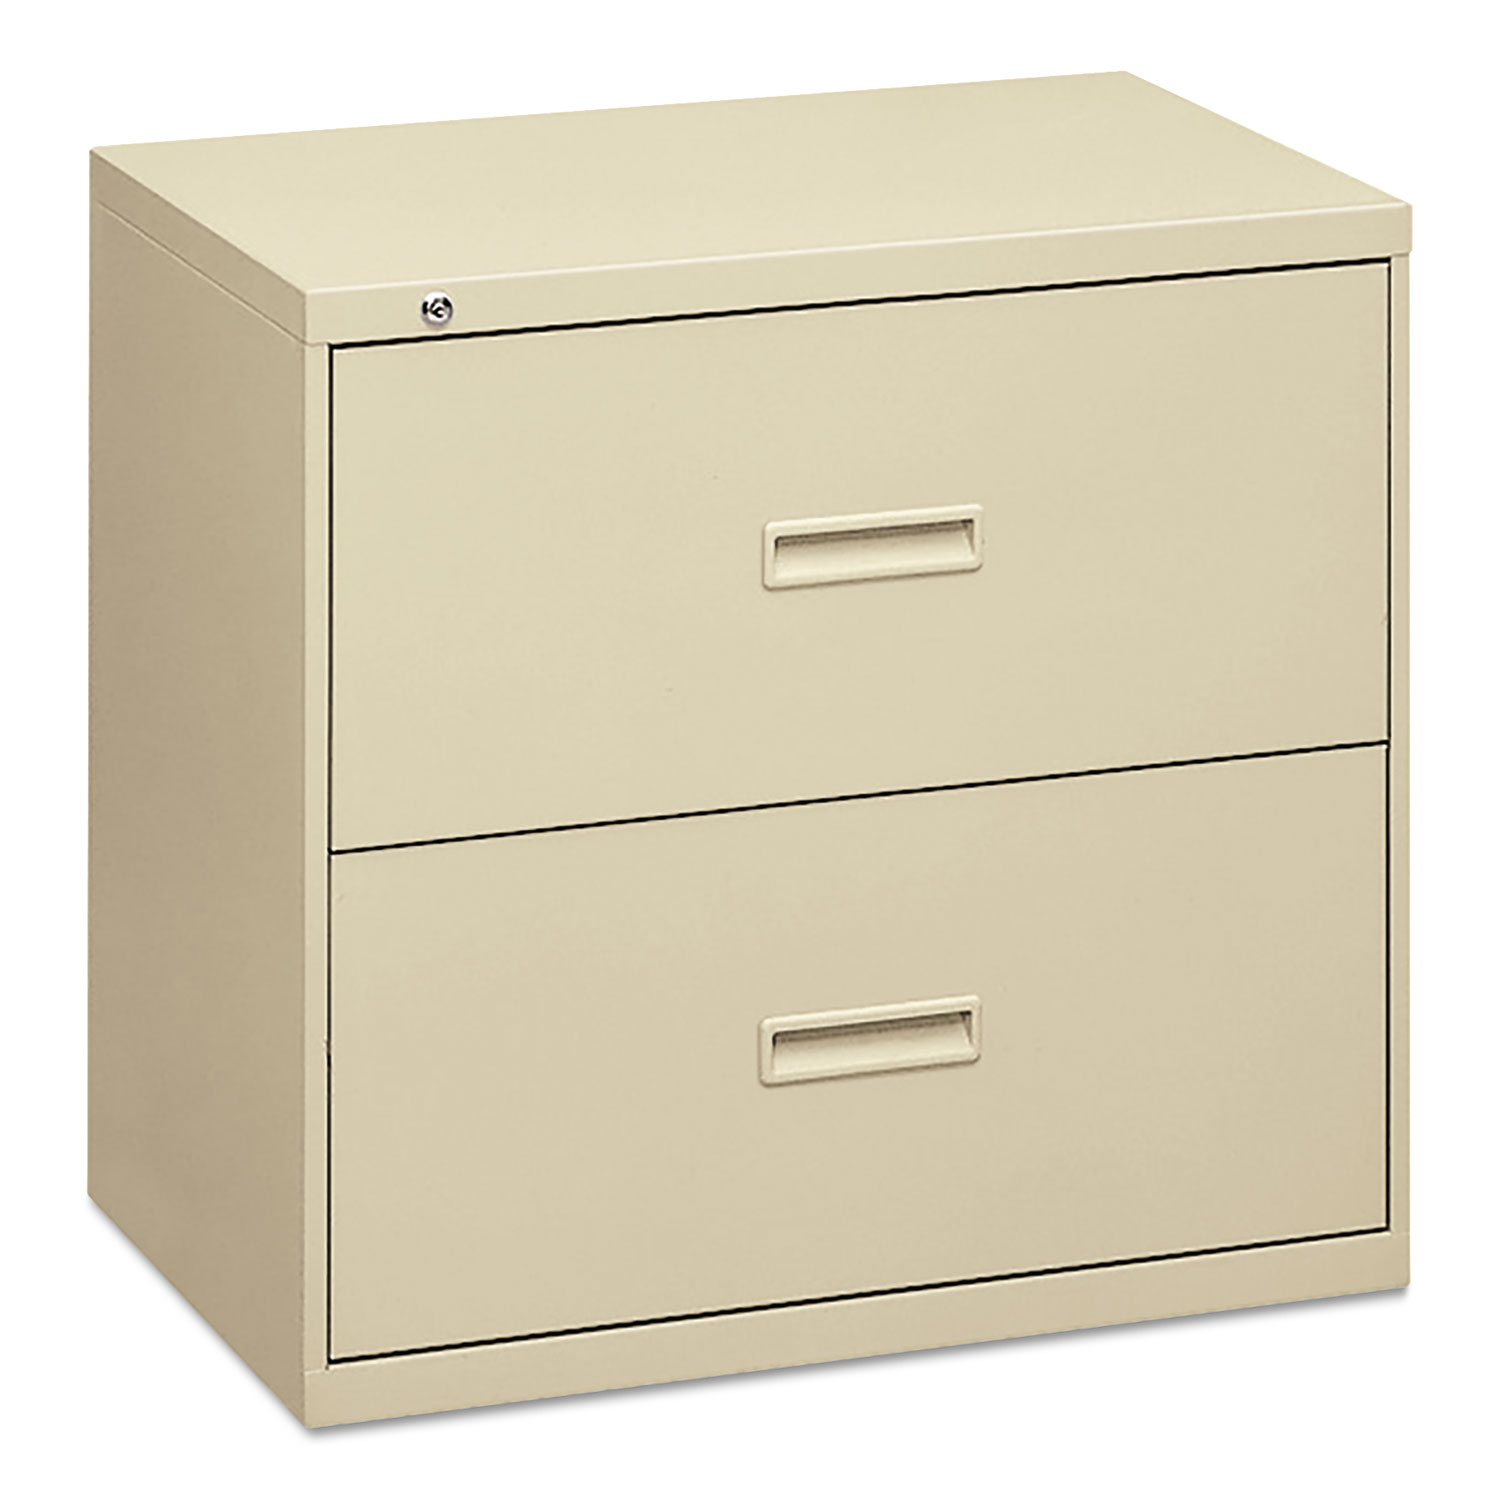  HON H432.L.L 400 Series Two-Drawer Lateral File, 30w x 18d x 28h, Putty (BSX432LL) 